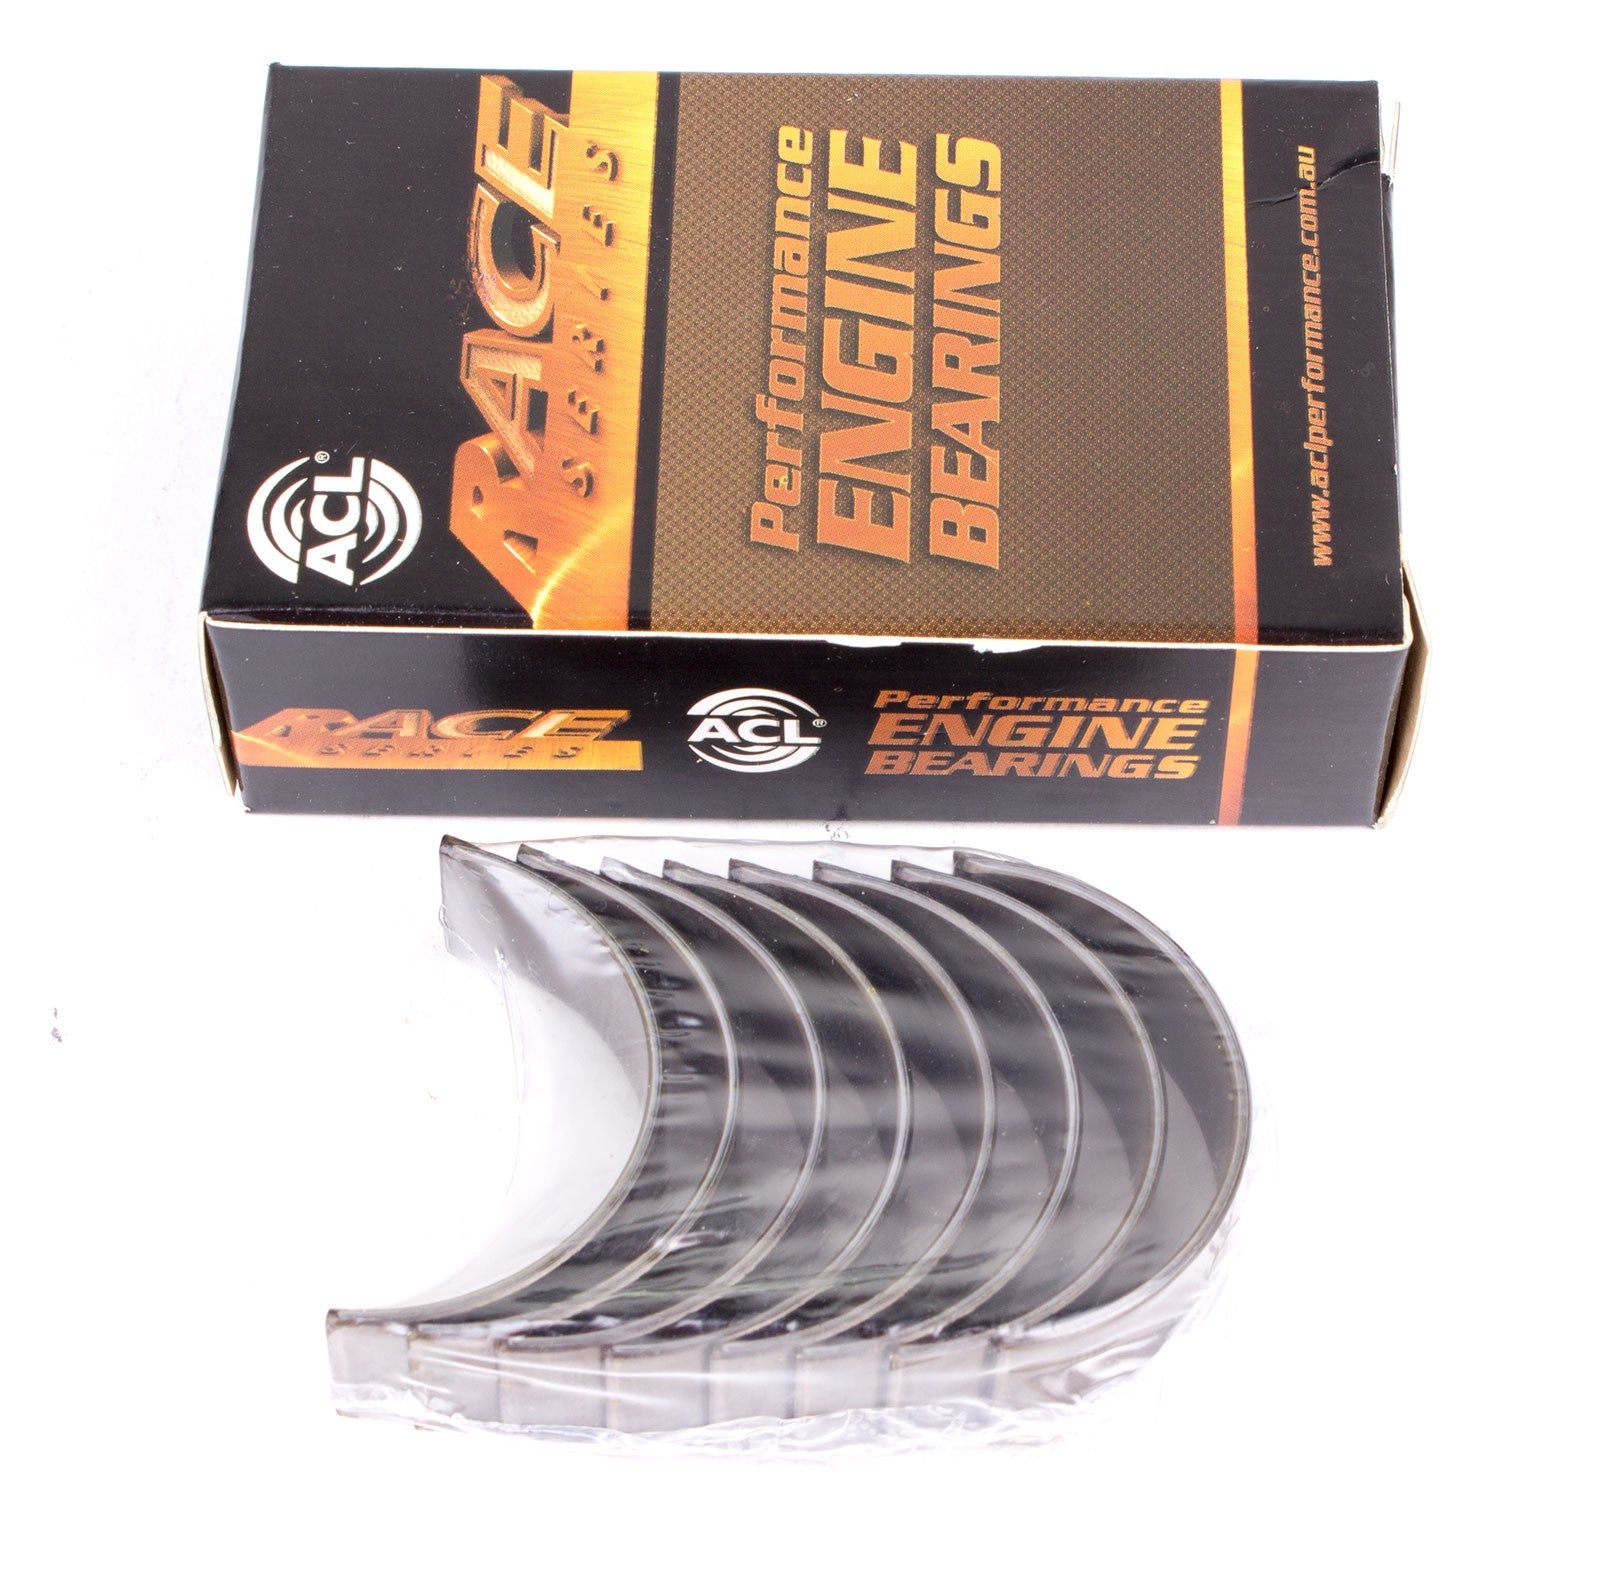 ACL 5M829H-010 Main bearing set (ACL Race Series) Photo-0 